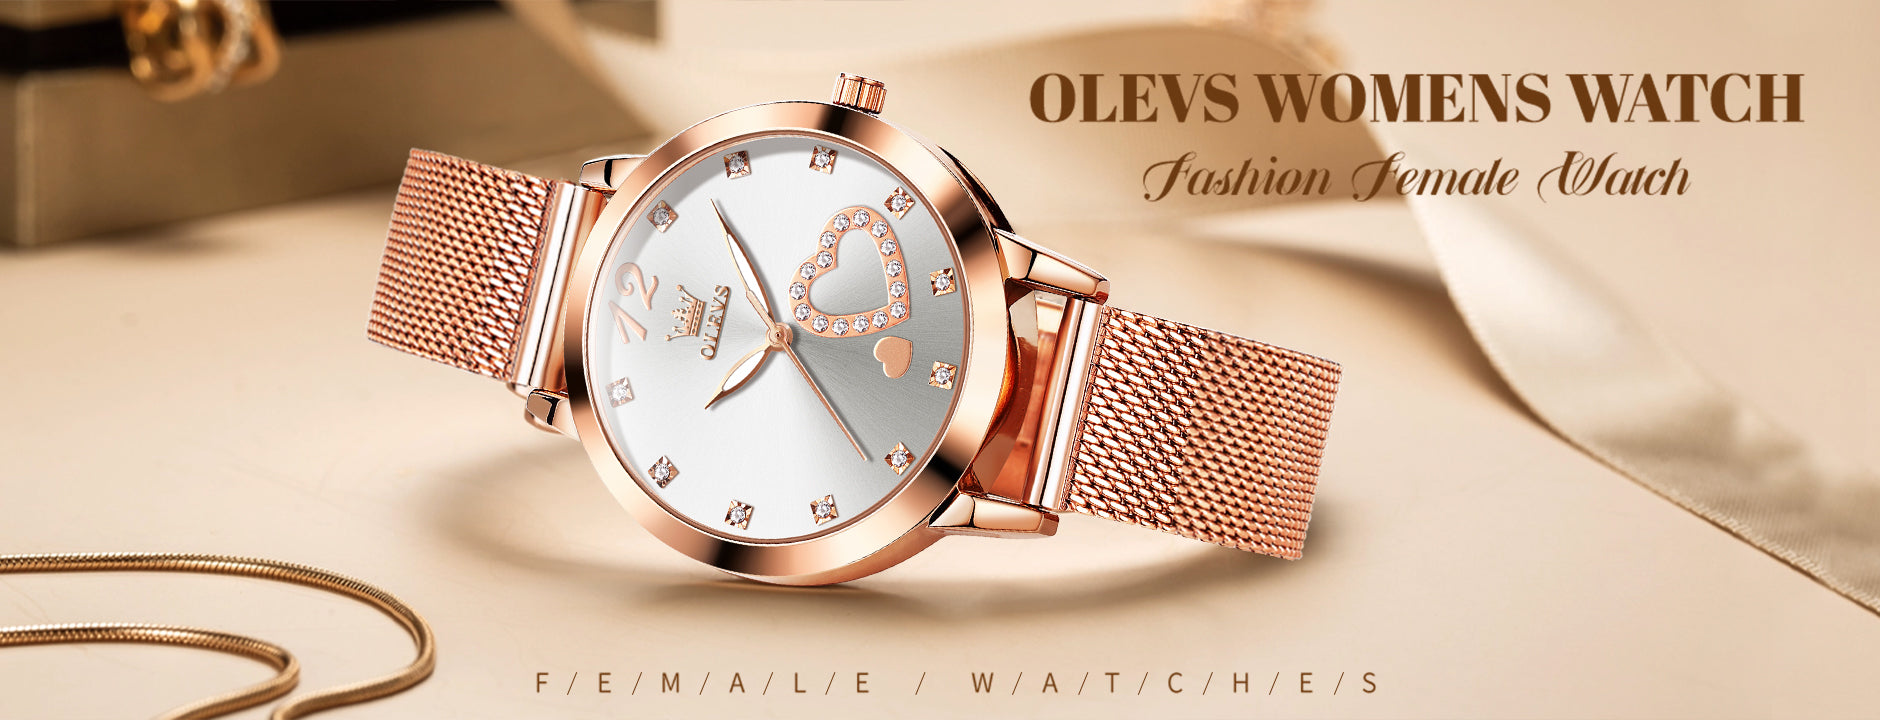 Mens Archives - OLEVS WATCHES